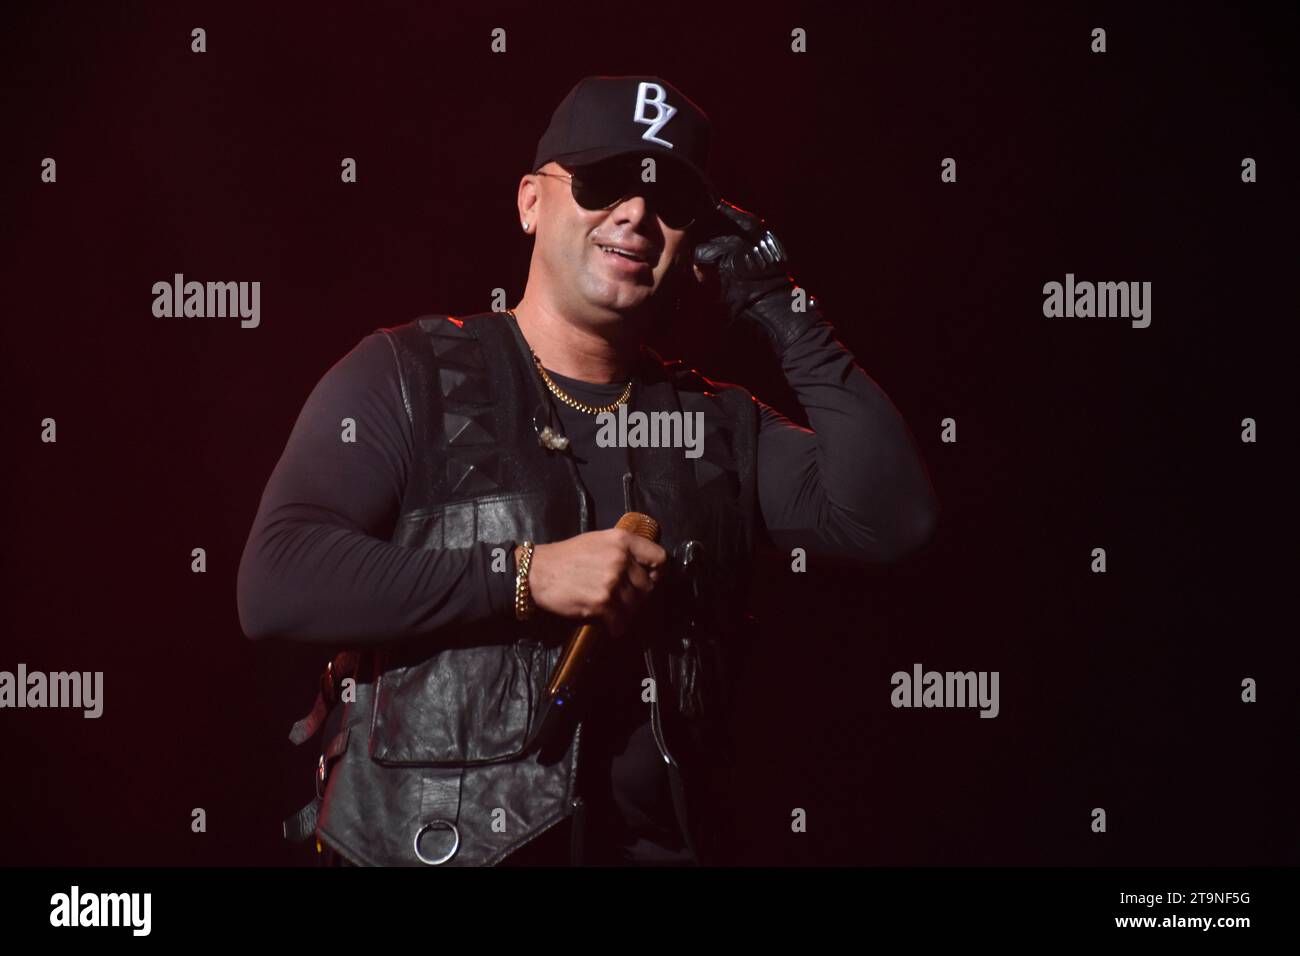 Mexico City, Mexico. 25th Nov, 2023. Juan Luis Morera, known as Wisin of the Puerto Rican Reggaeton duo Wisin & Yandel, is performing on stage as part of the 'Coca Cola Flow Fest 2023' Reggaeton music festival at Autodromo Hermanos Rodriguez in Mexico City, Mexico, on November 25, 2023. (Photo by Essene Hernandez/Eyepix Group) Credit: NurPhoto SRL/Alamy Live News Stock Photo